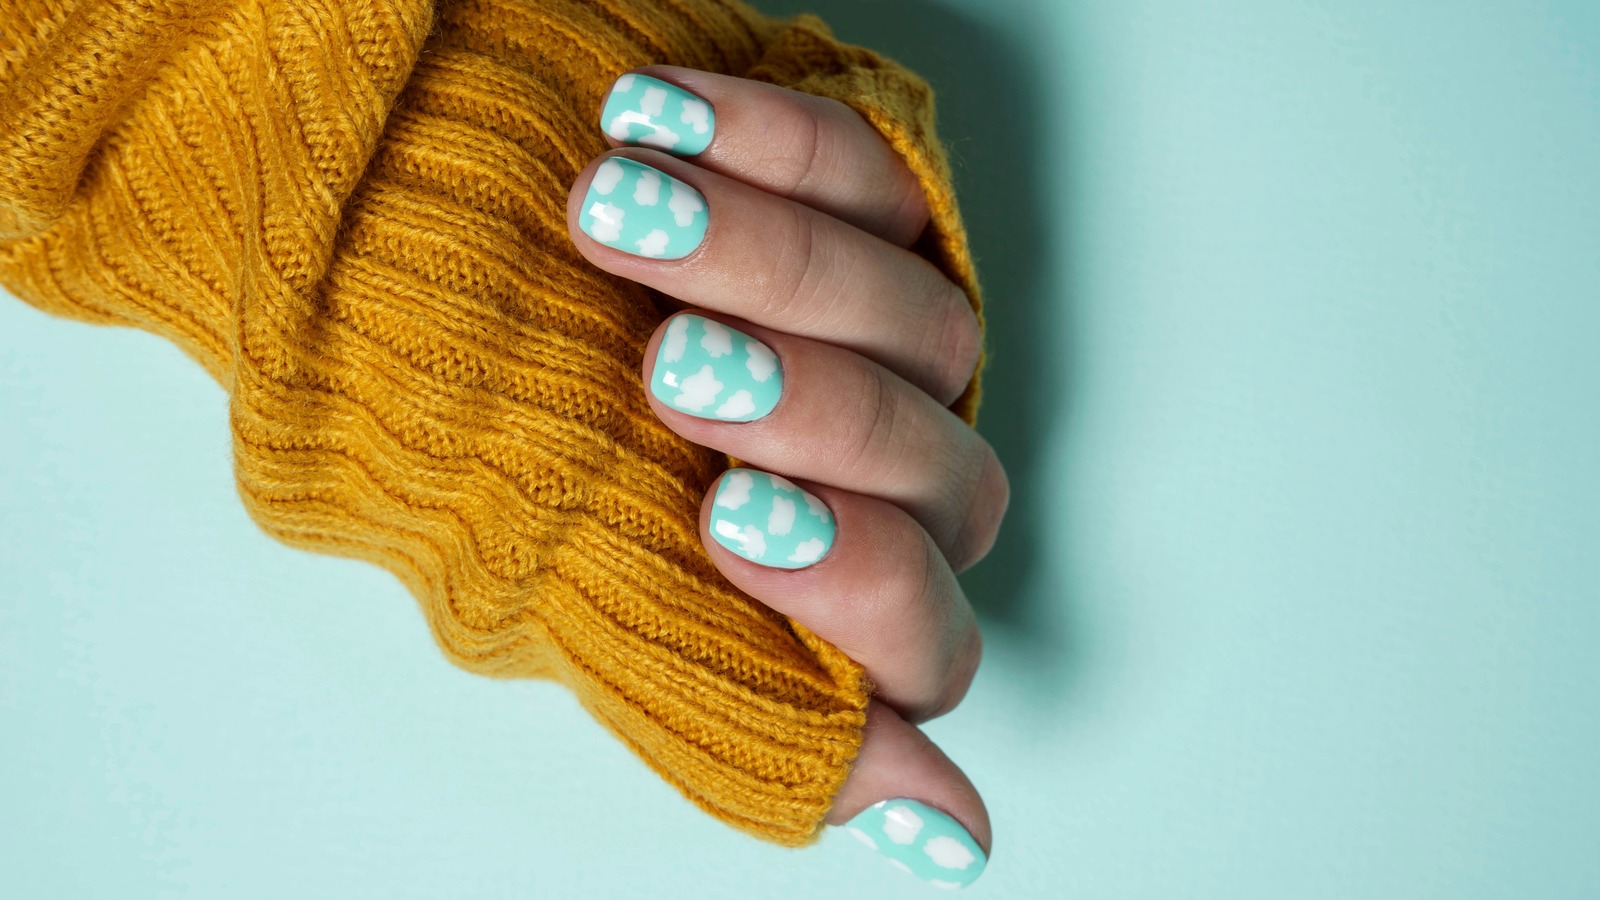 Cloud Nails Give Your Manicure A Heavenly Polished Look